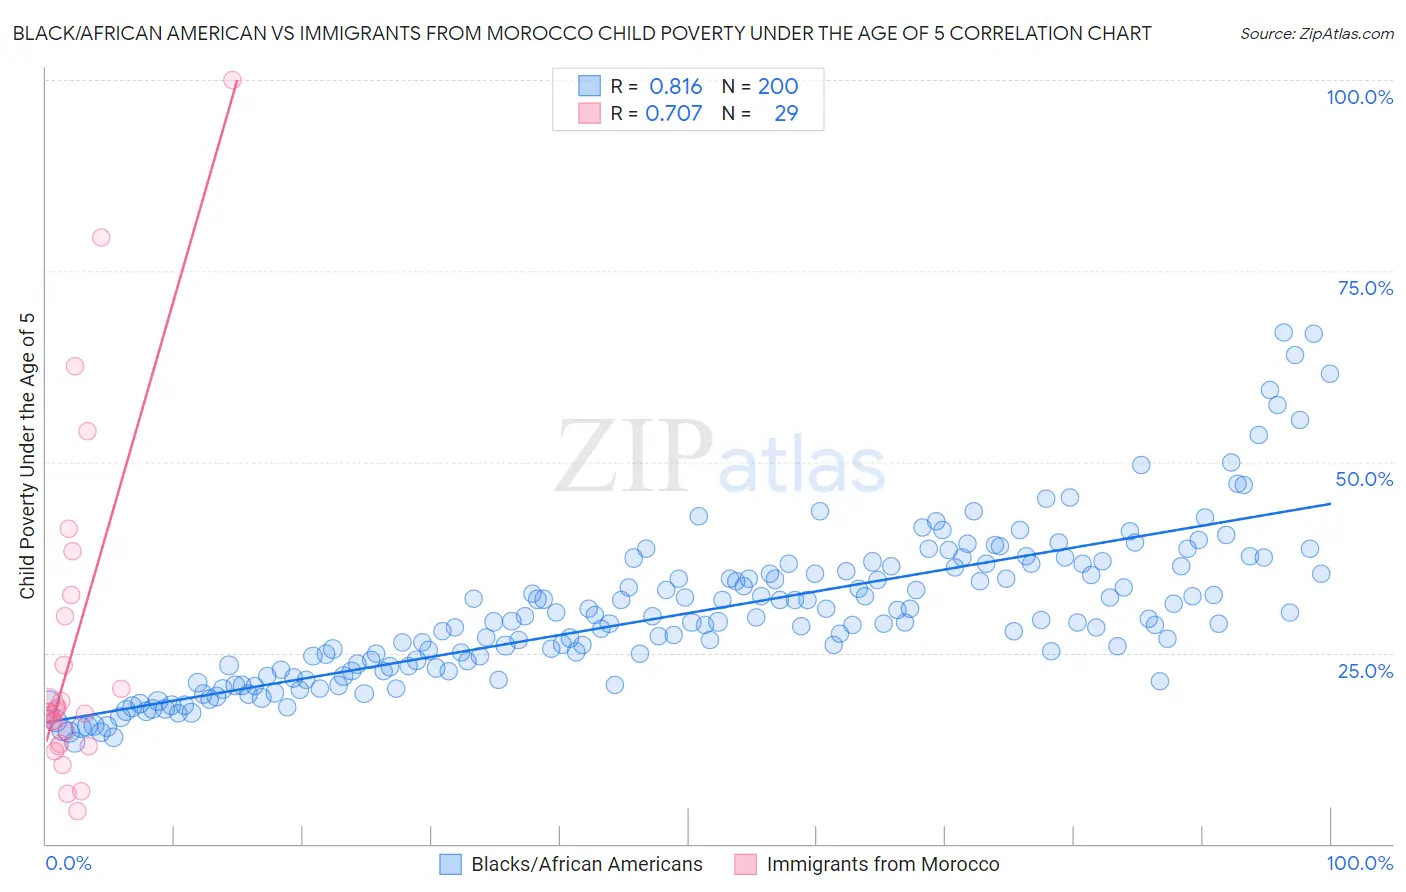 Black/African American vs Immigrants from Morocco Child Poverty Under the Age of 5